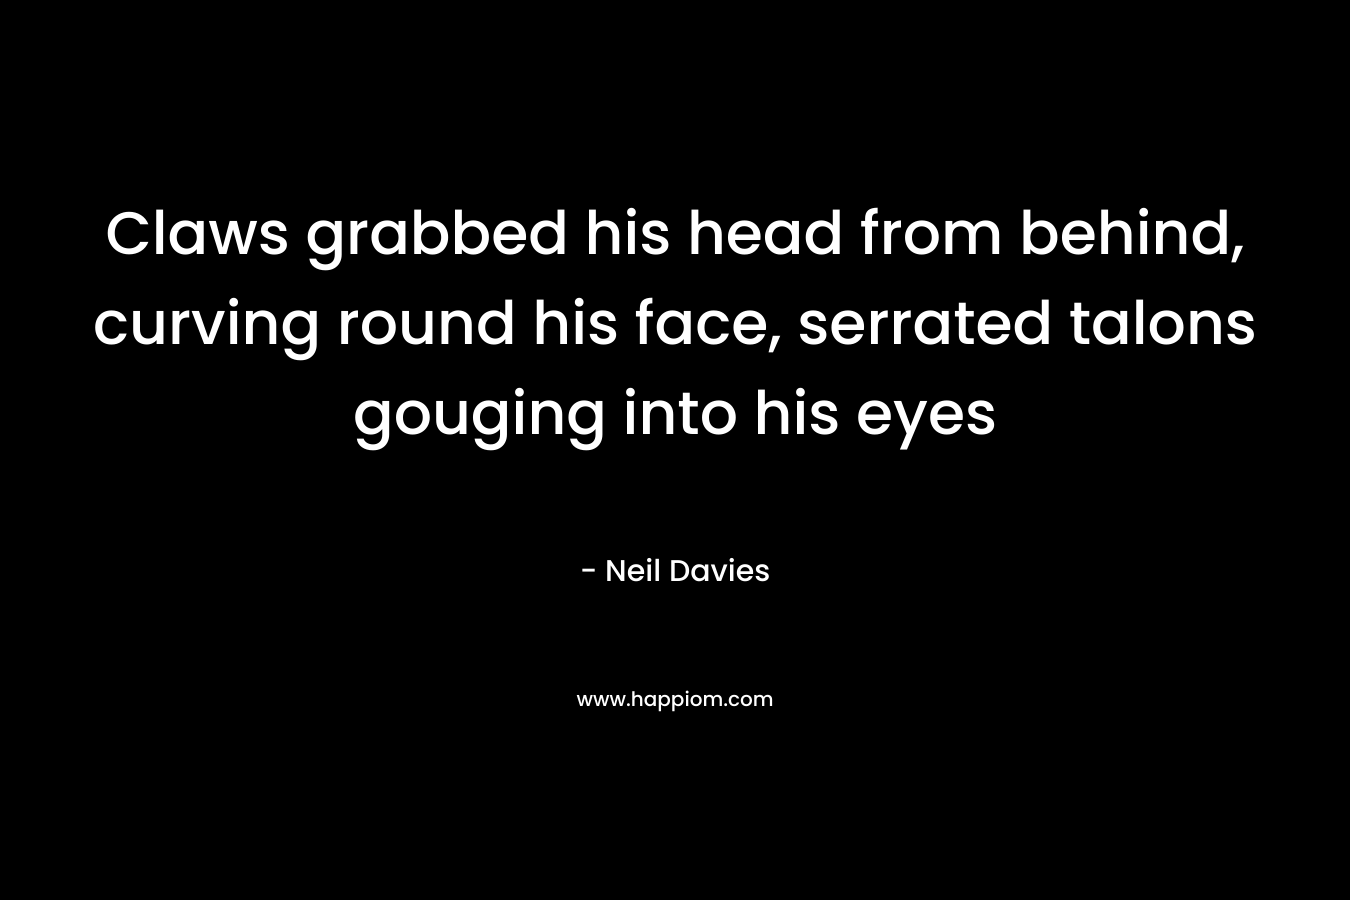 Claws grabbed his head from behind, curving round his face, serrated talons gouging into his eyes – Neil Davies